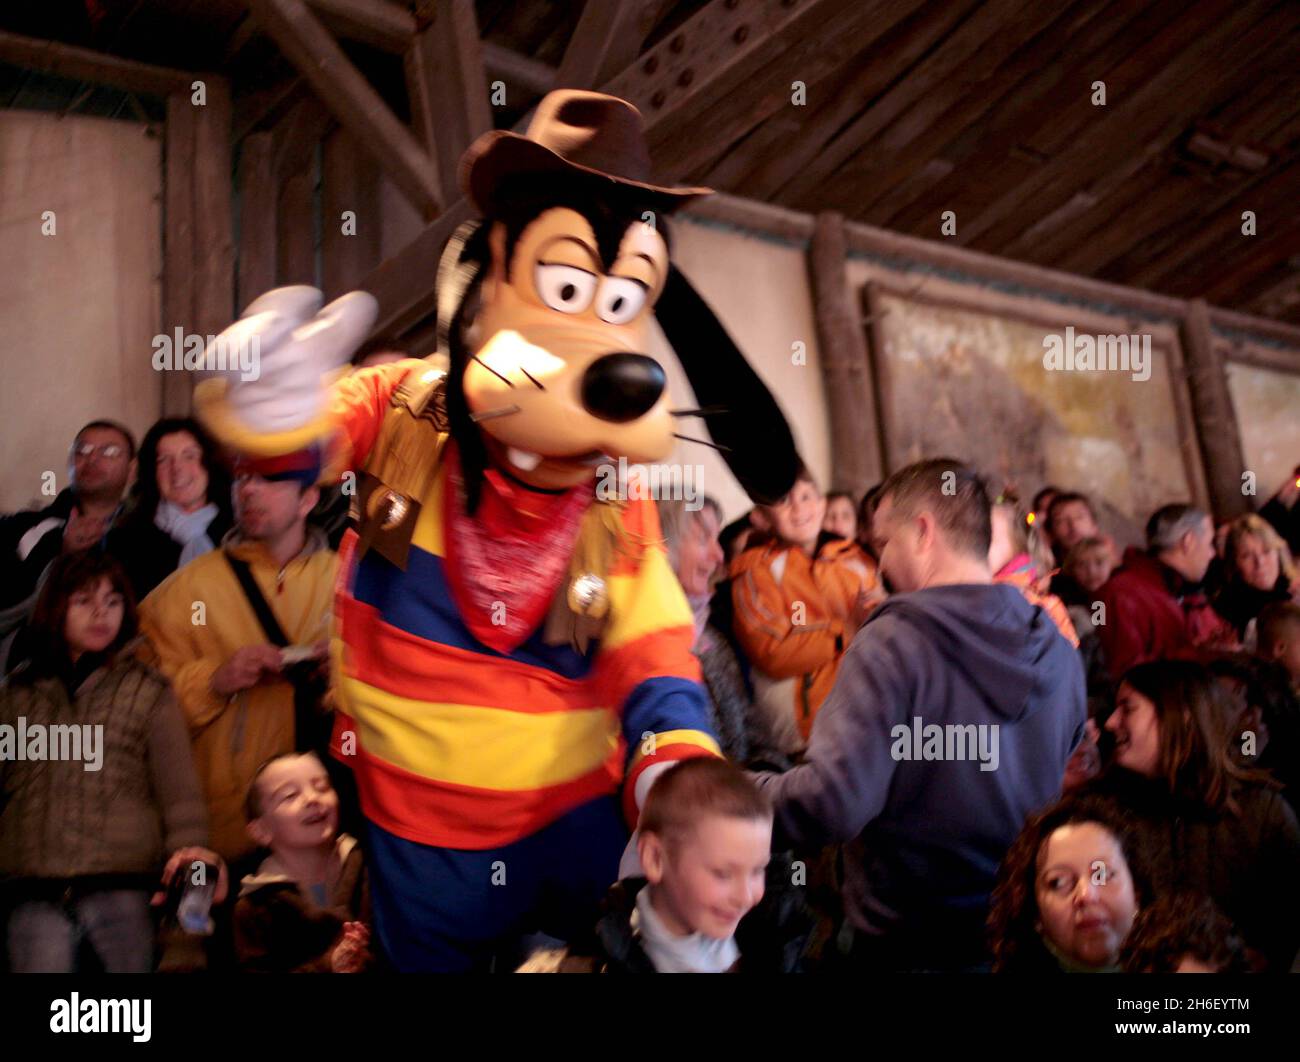 Goofy during the Christmas celebrations at the Disneyland Resort in Paris, on November 13, 2006. Stock Photo